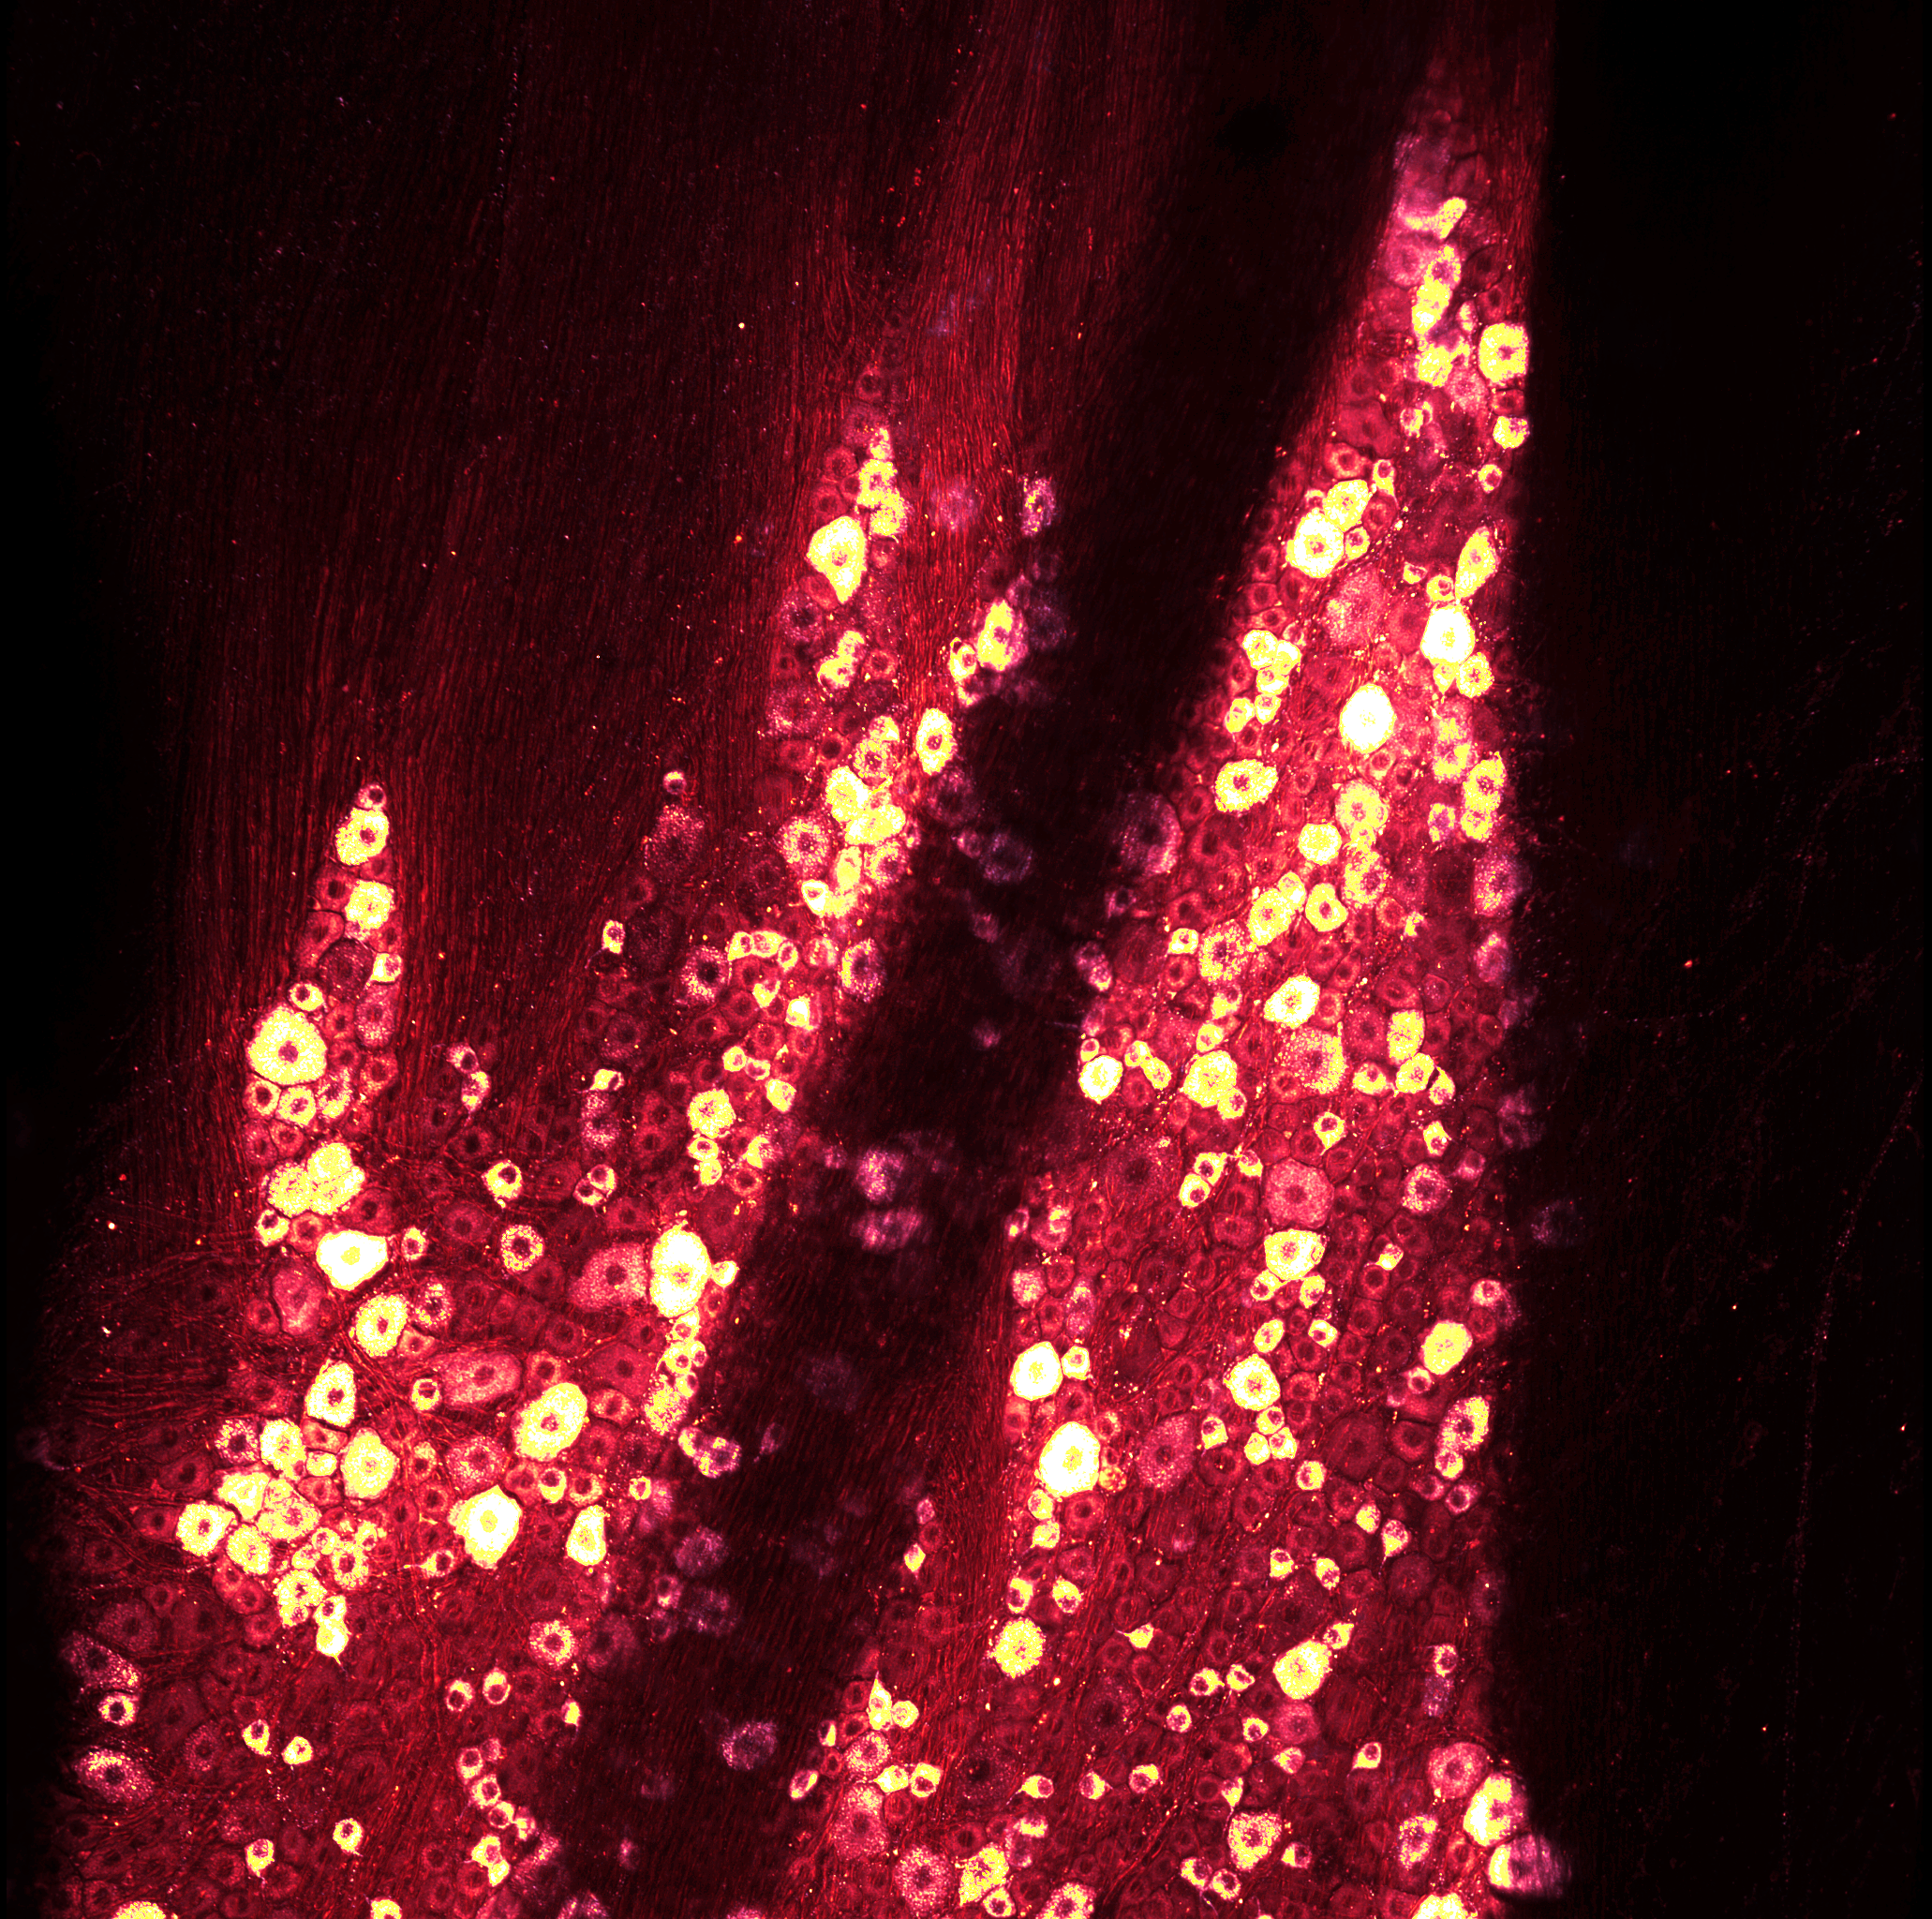 Two-photon image of TRPV1 expressing cells in the trigeminal ganglion